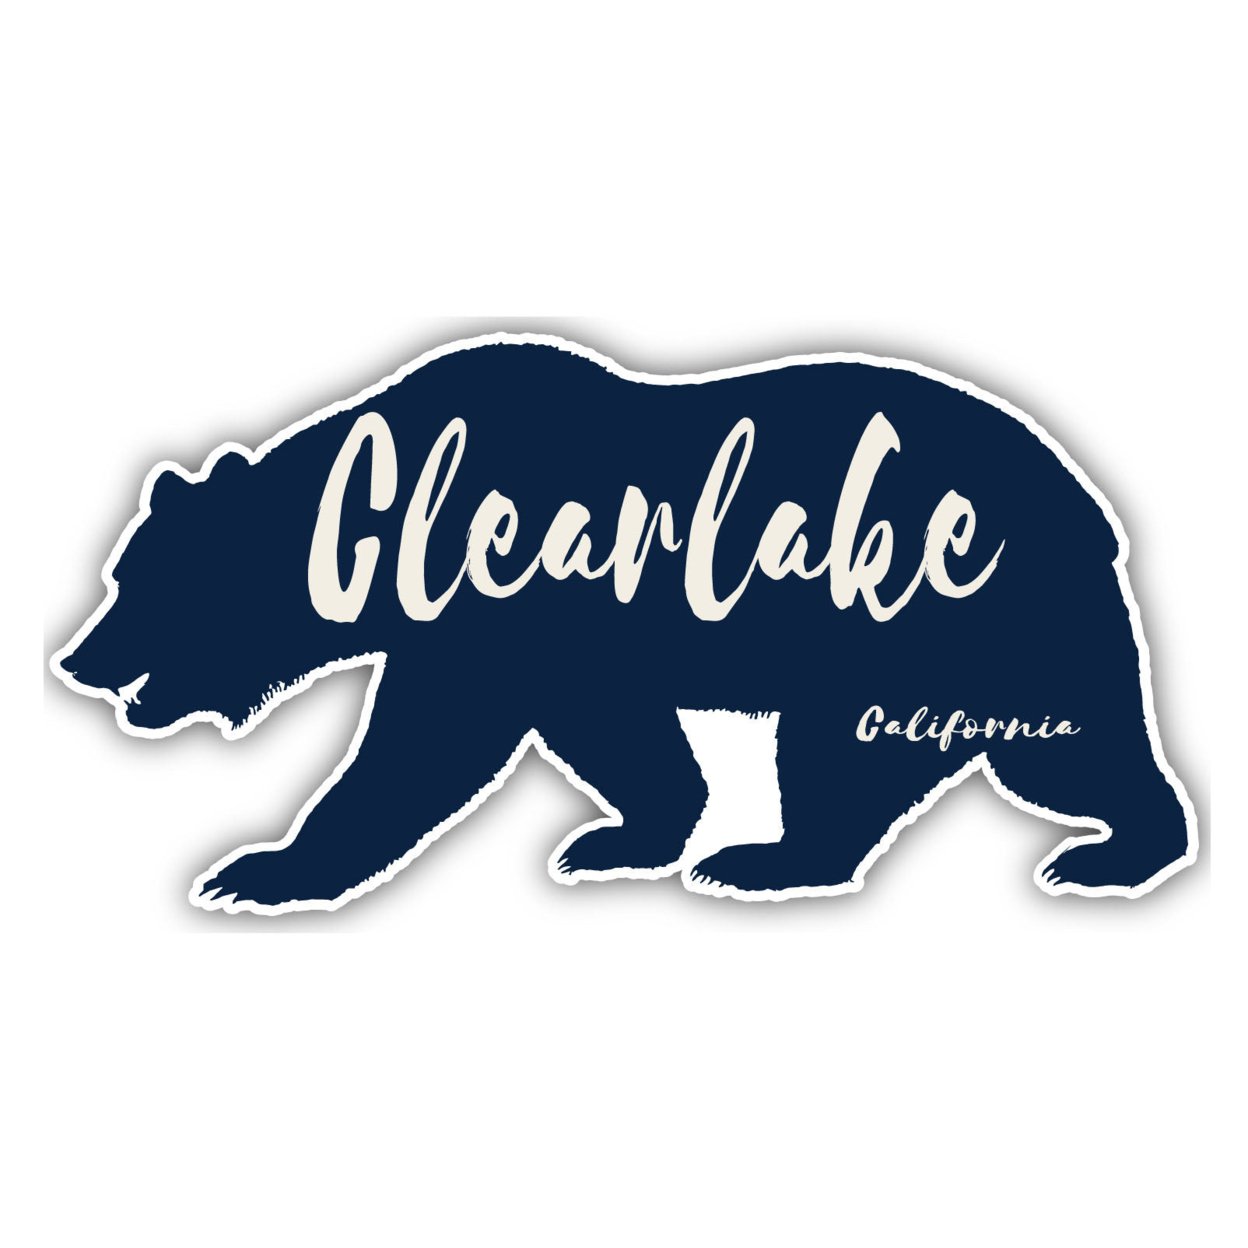 Clearlake California Souvenir Decorative Stickers (Choose Theme And Size) - 4-Pack, 8-Inch, Tent